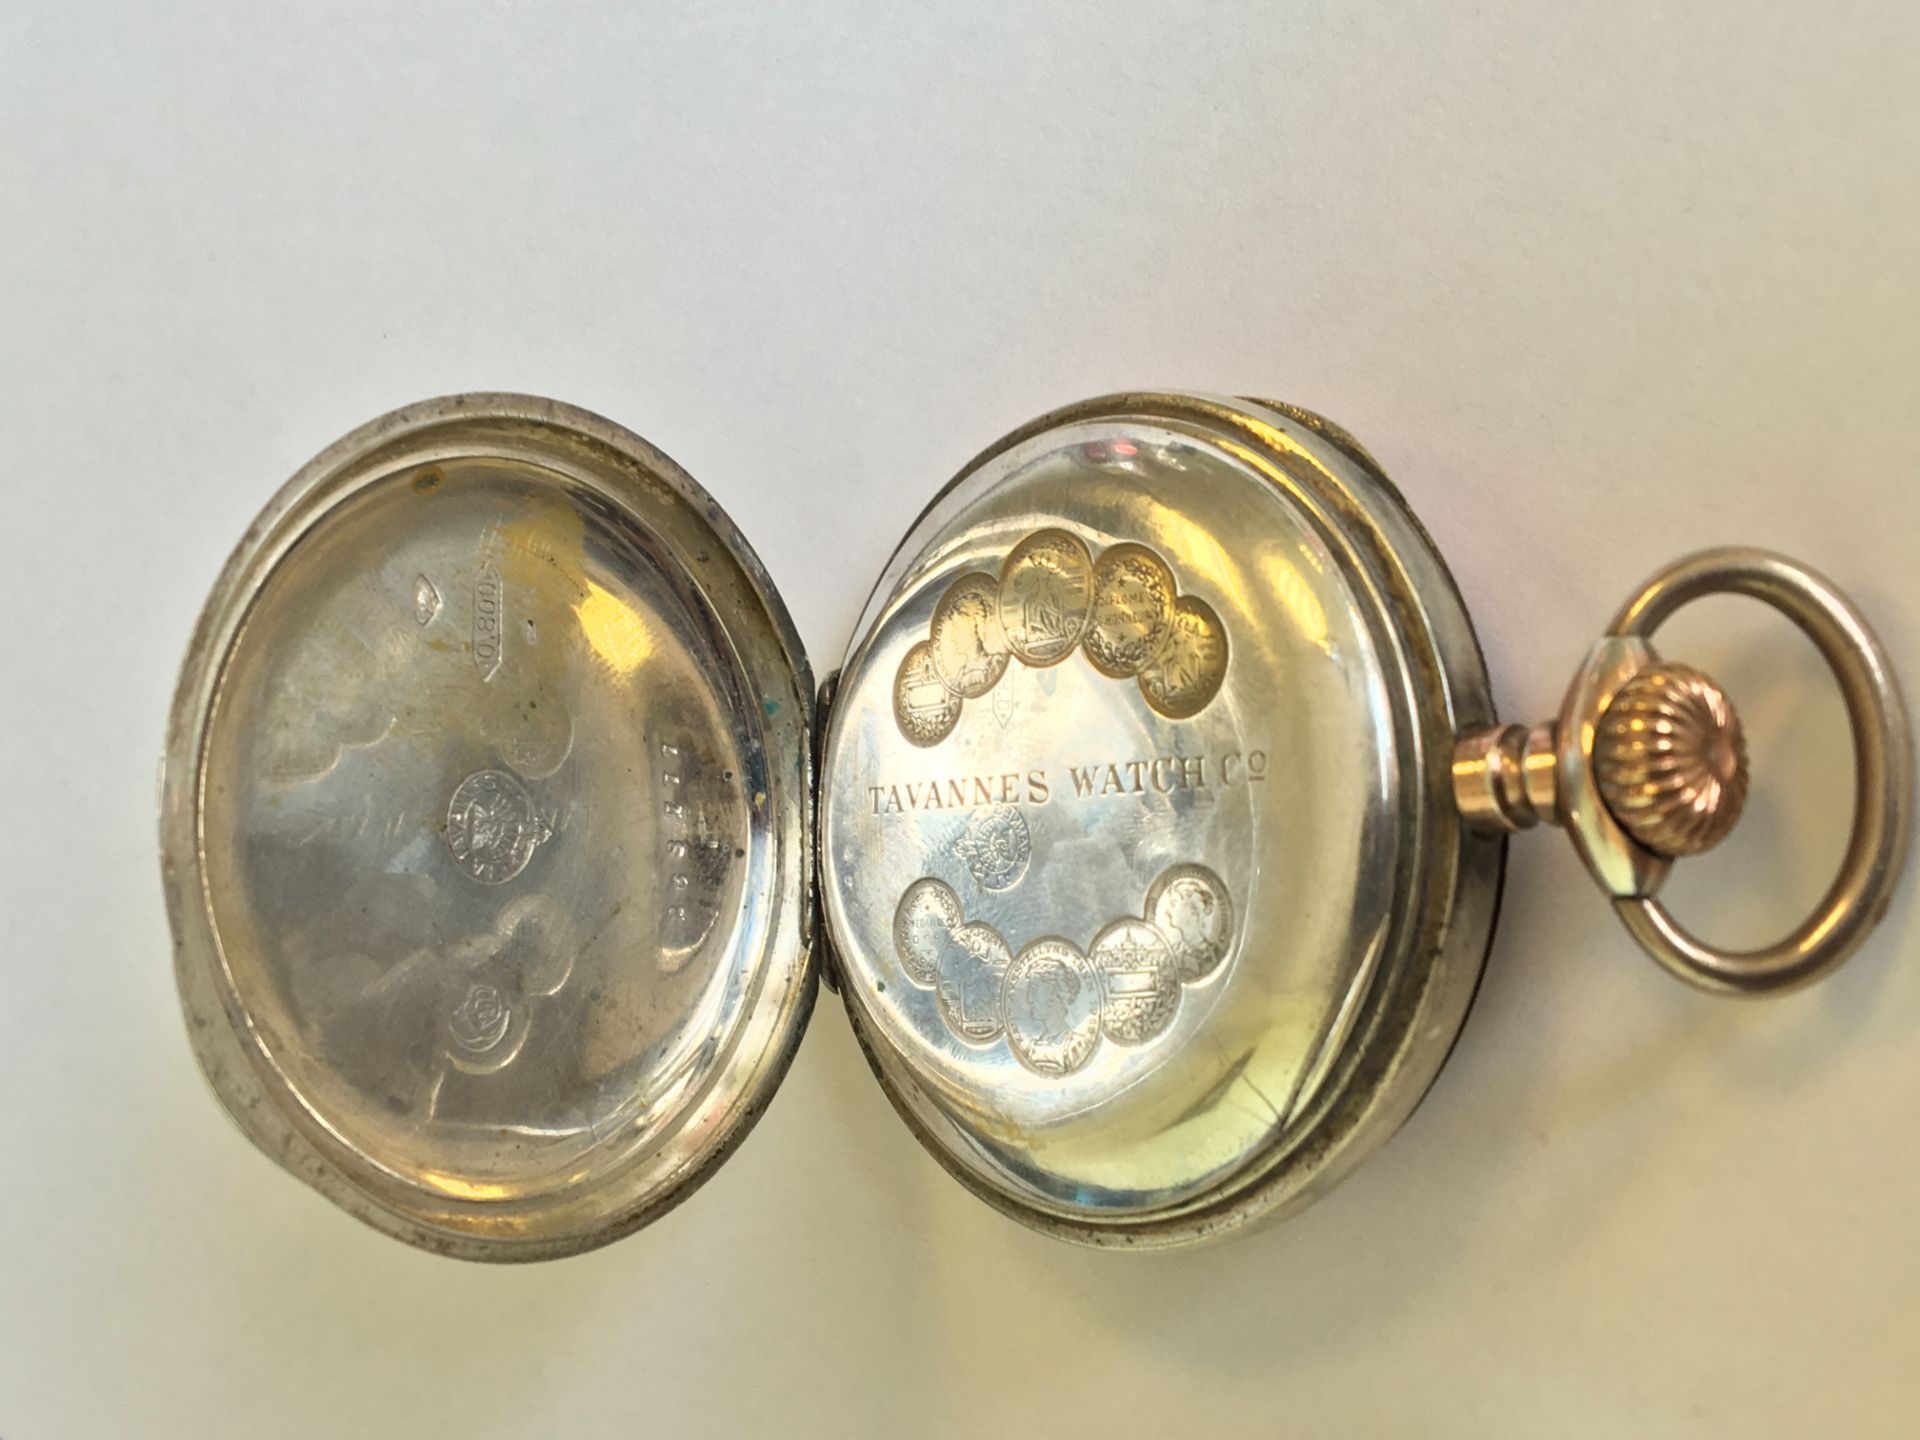 AN ANTIQUE TAVANNES POCKET WATCH. SILVER CASE (800% GROUSE MARK) WITH ROSE GOLD PLATING. THE ART - Image 3 of 4